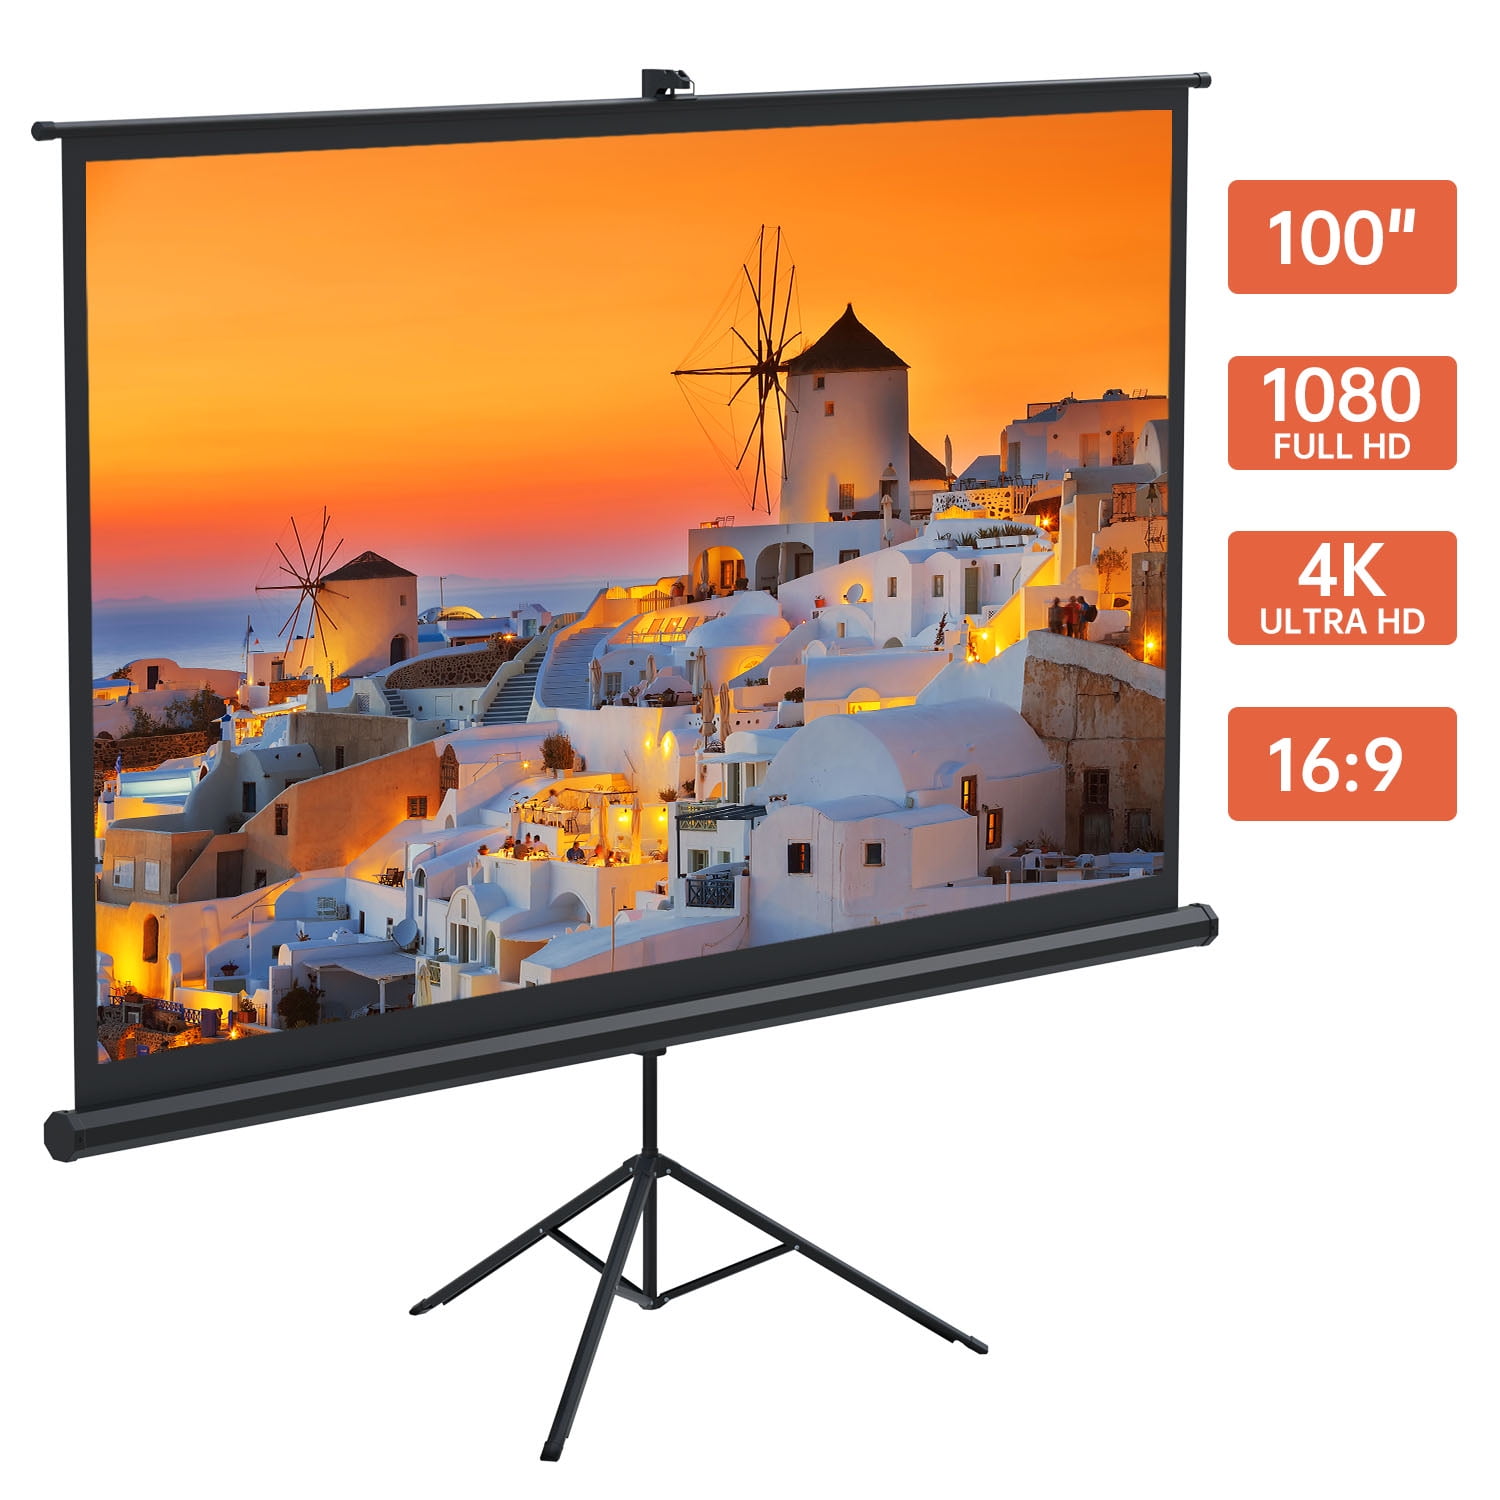 LYH Indoor Outdoor Projection Screen 100 inch 16:9 for Movie Office Presentation HD Premium Wrinkle-Free Design Portable Tripod Projector Screen with Stand Ease of Use, 160° Viewing Angle 